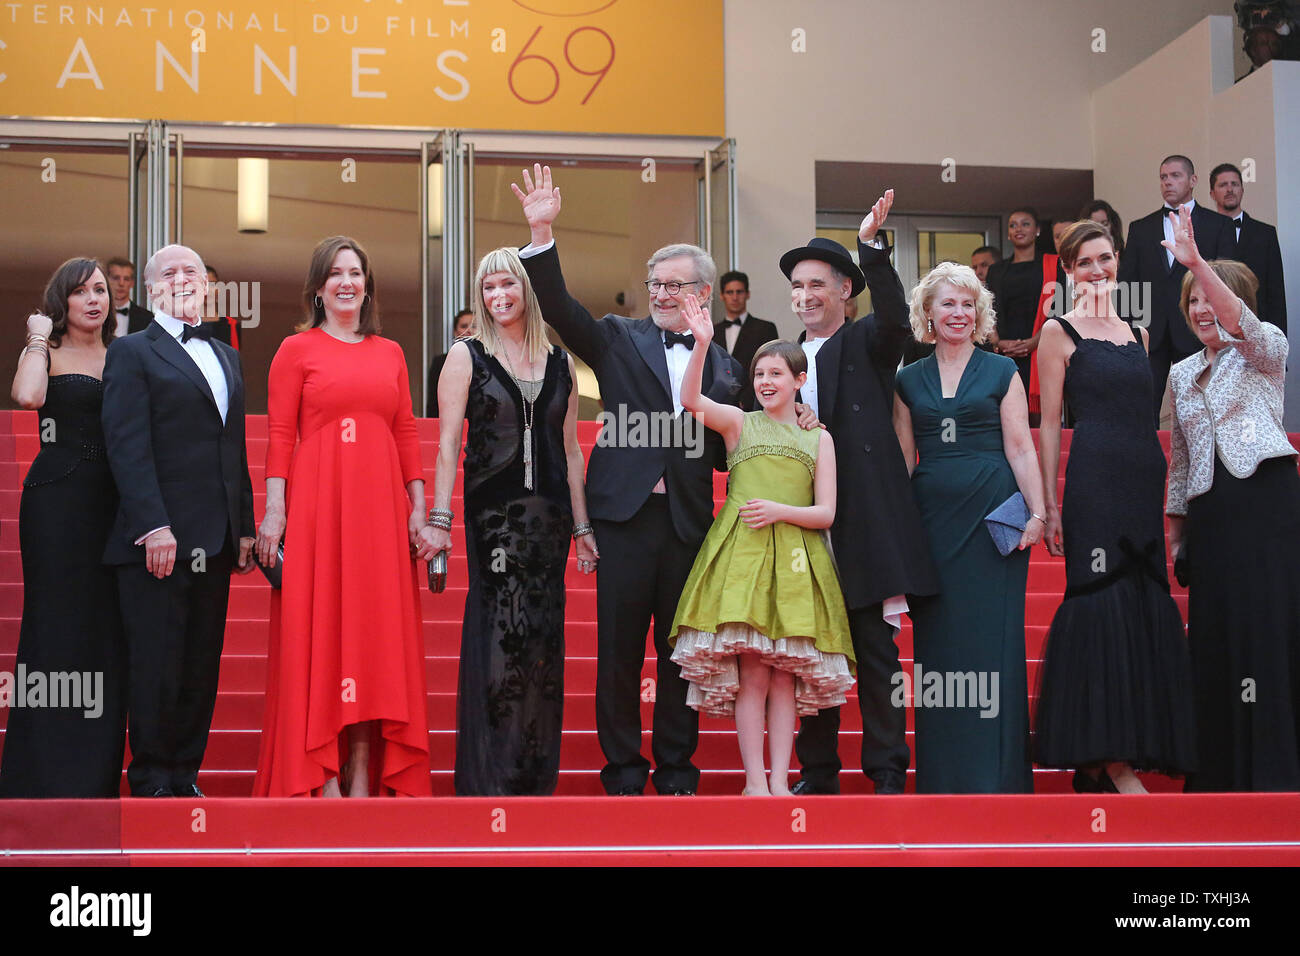 The team from The BFG, including Kathleen Kennedy, Kate Capshaw, Steven Spielberg, Ruby Barnhill, Mark Rylance, Claire van Kampen, Lucy Dahl and Penelope Wilton, arrive on the steps of the Palais des Festivals before the screening of the film 'The BFG' at the 69th annual Cannes International Film Festival in Cannes, France on May 14, 2016.  Photo by David Silpa/UPI Stock Photo